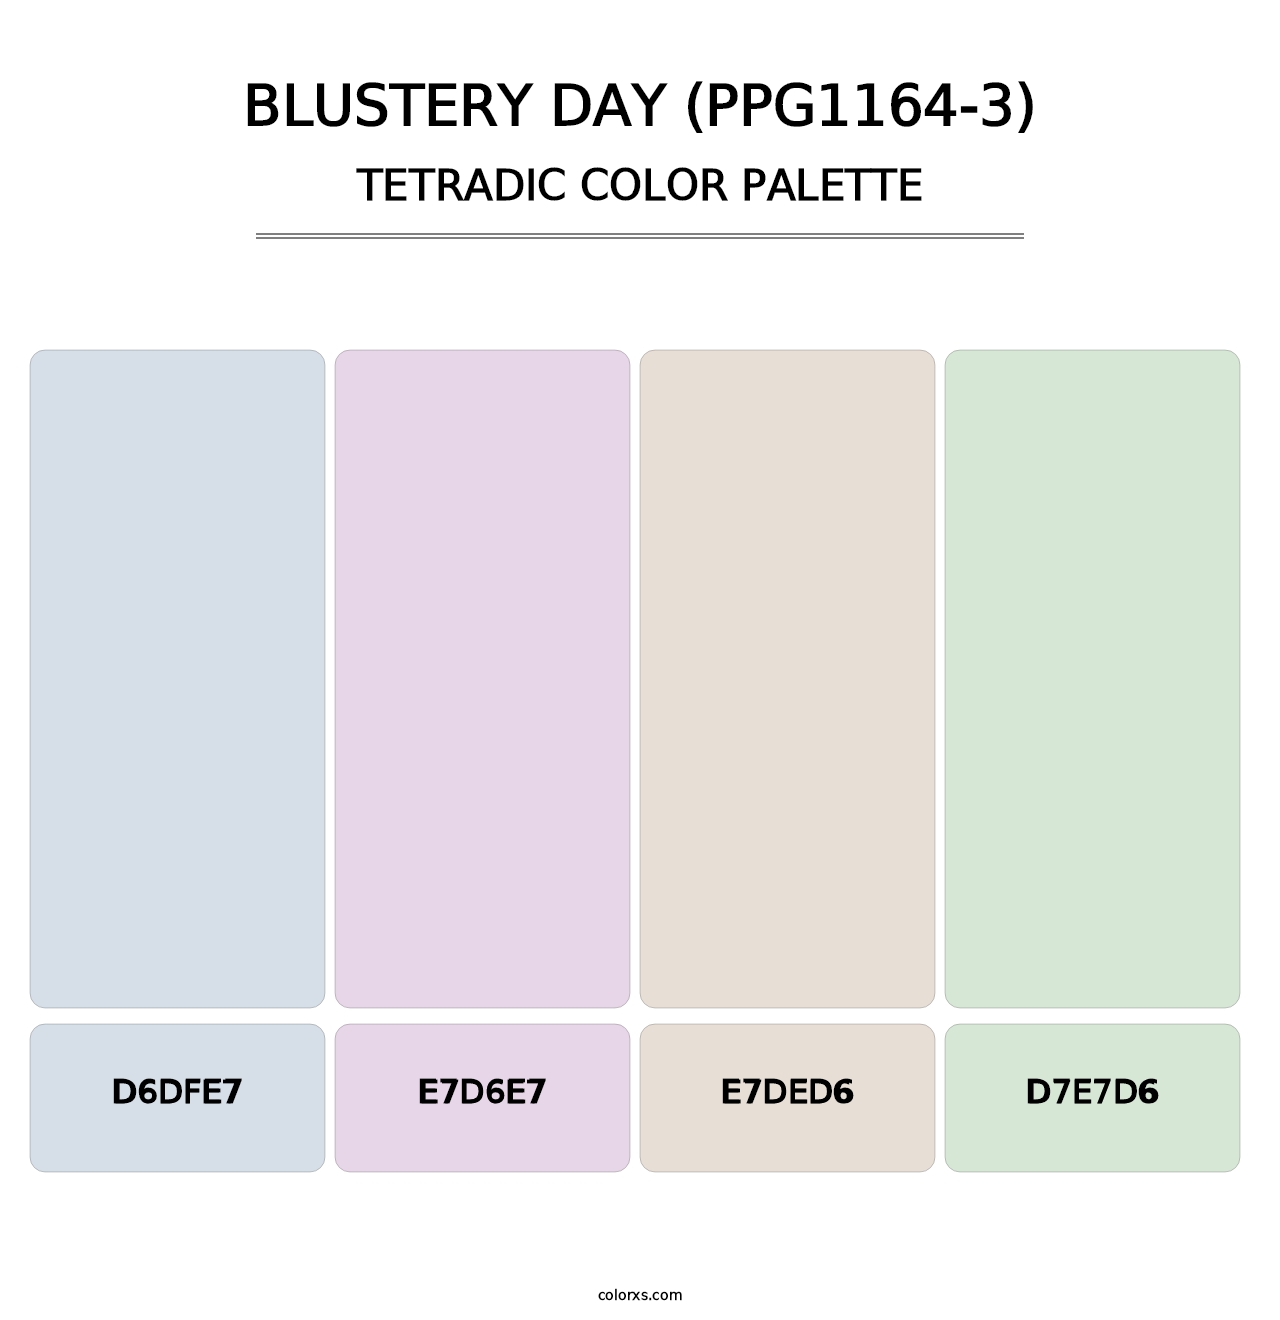 Blustery Day (PPG1164-3) - Tetradic Color Palette